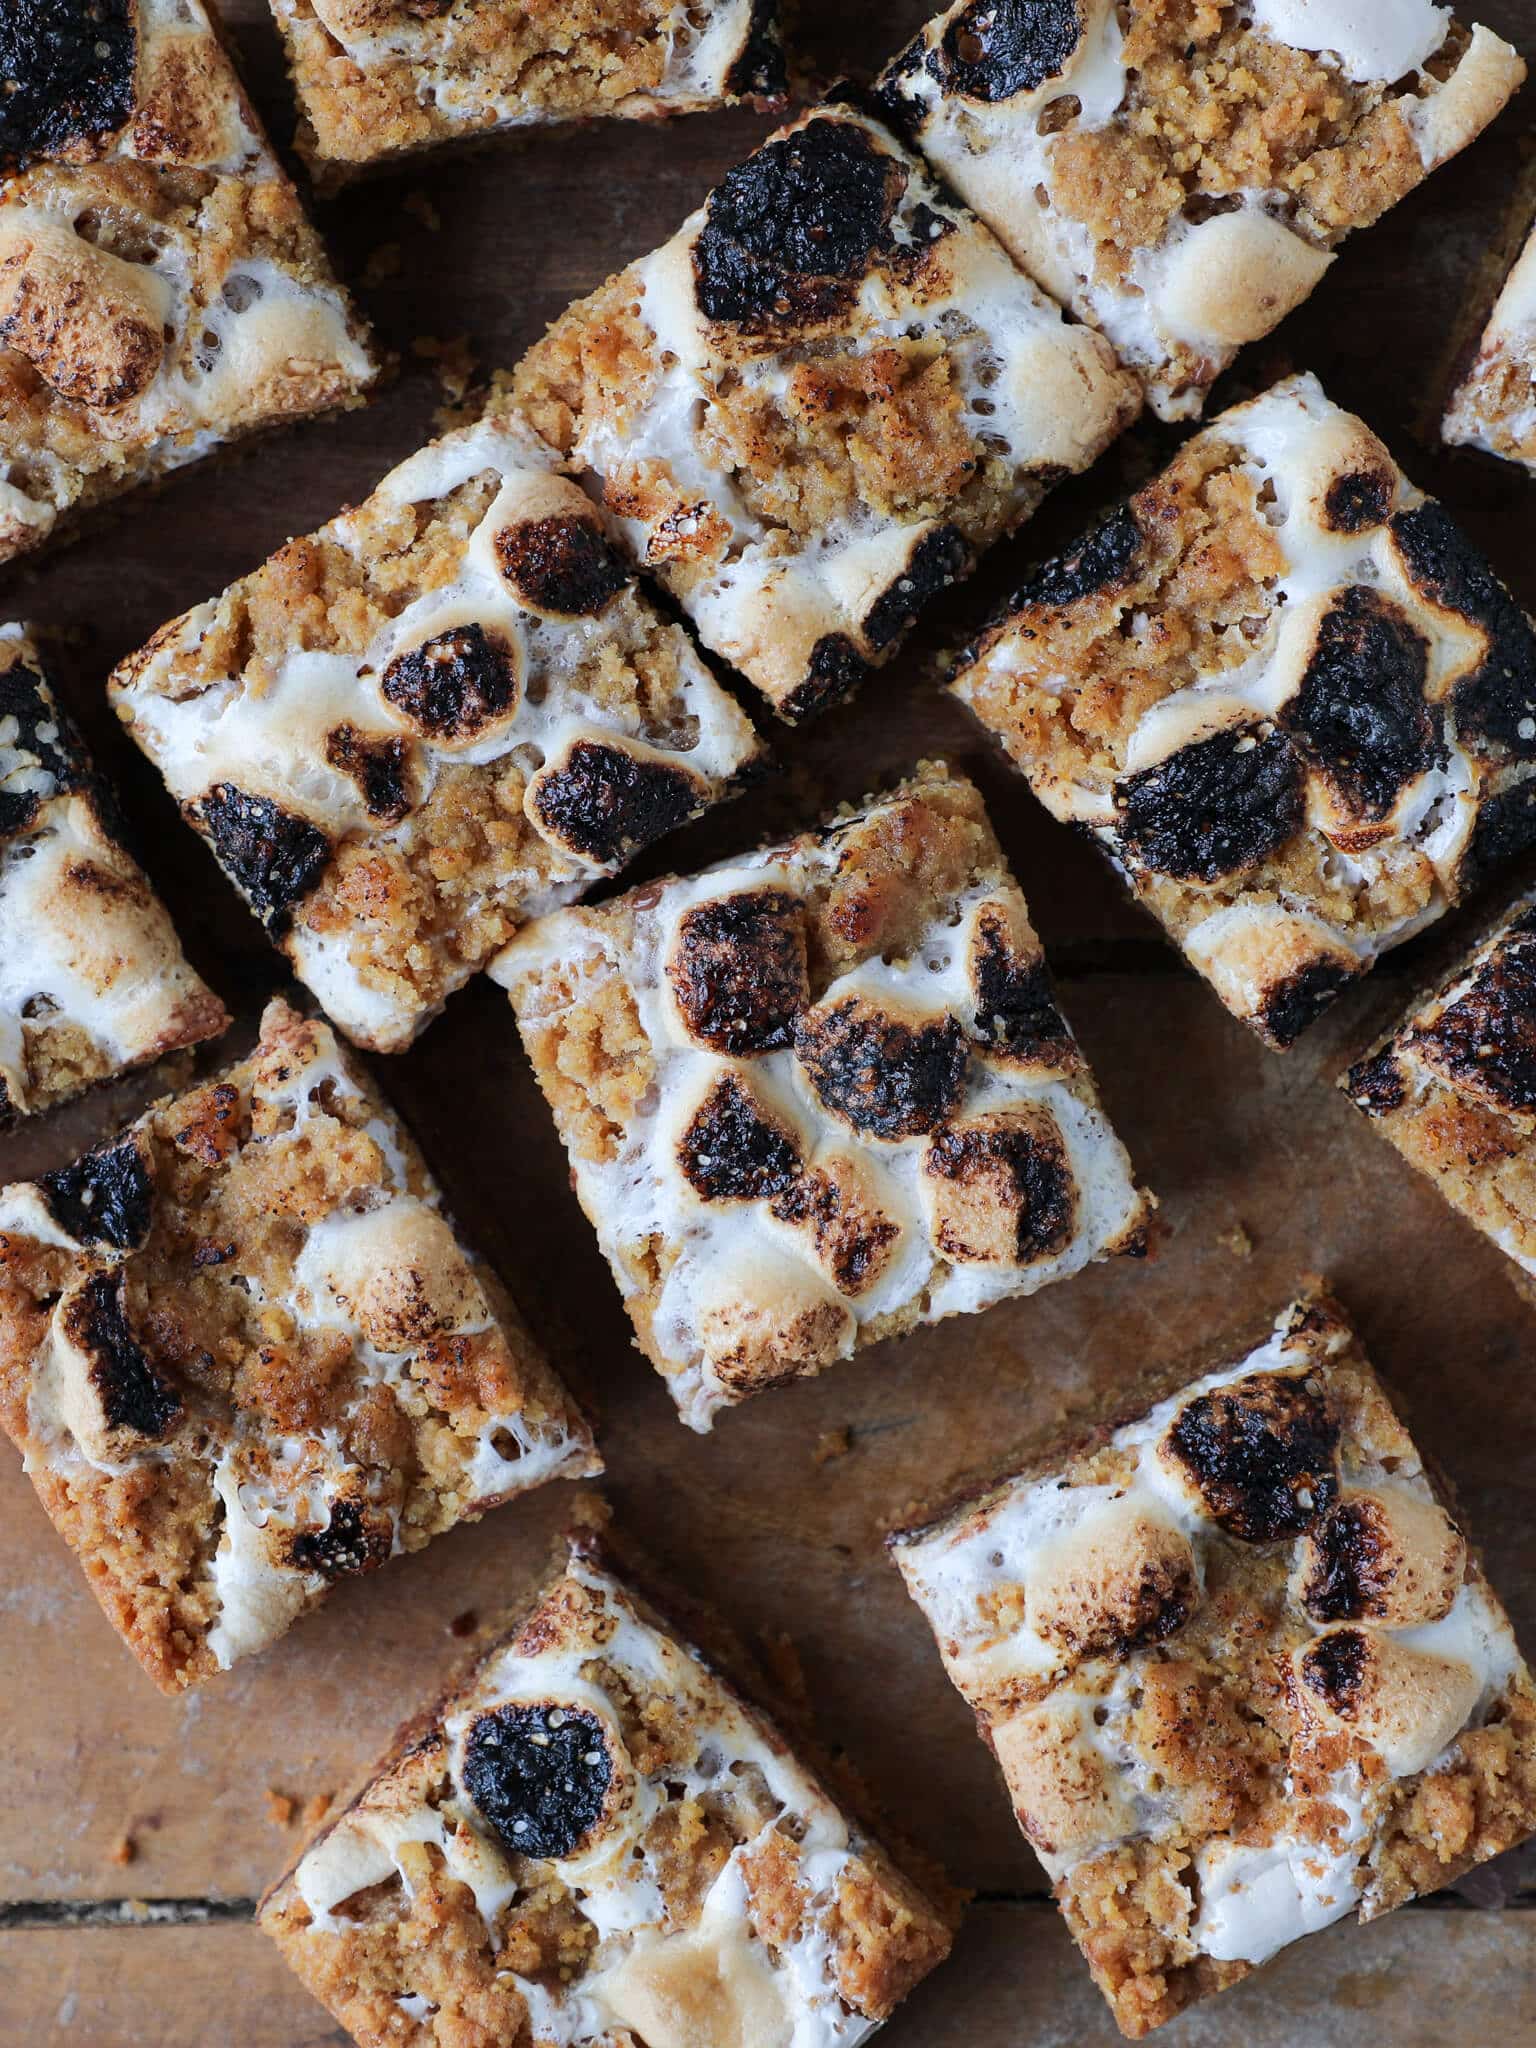 Soft Chewy Smores Crumble Bars arranged on wooden surface